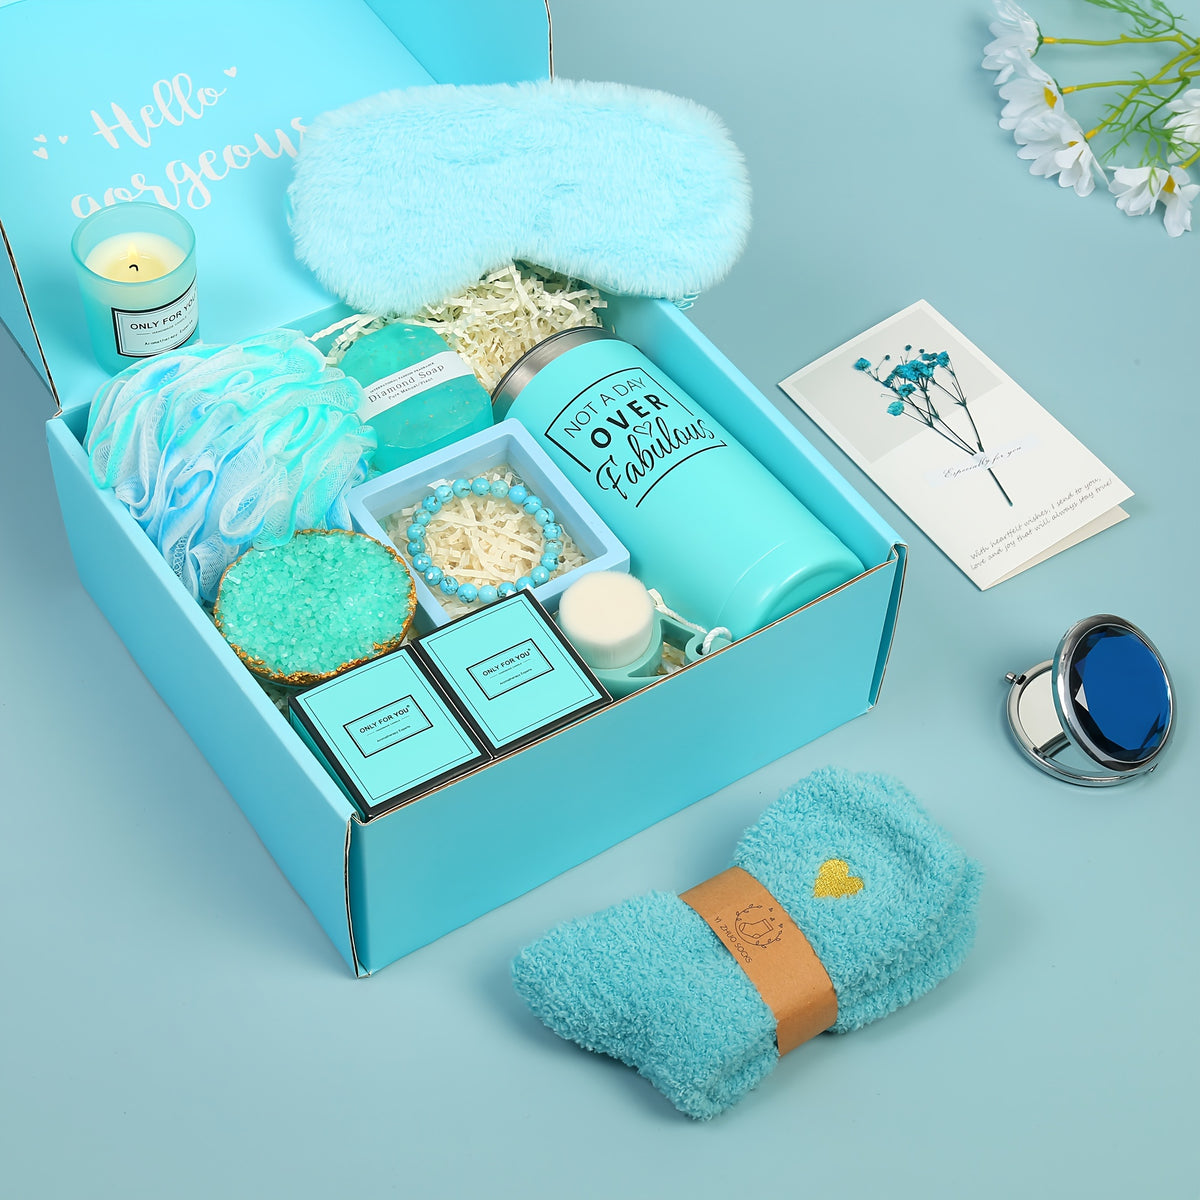 a blue box with a pair of sunglasses and a blue towel